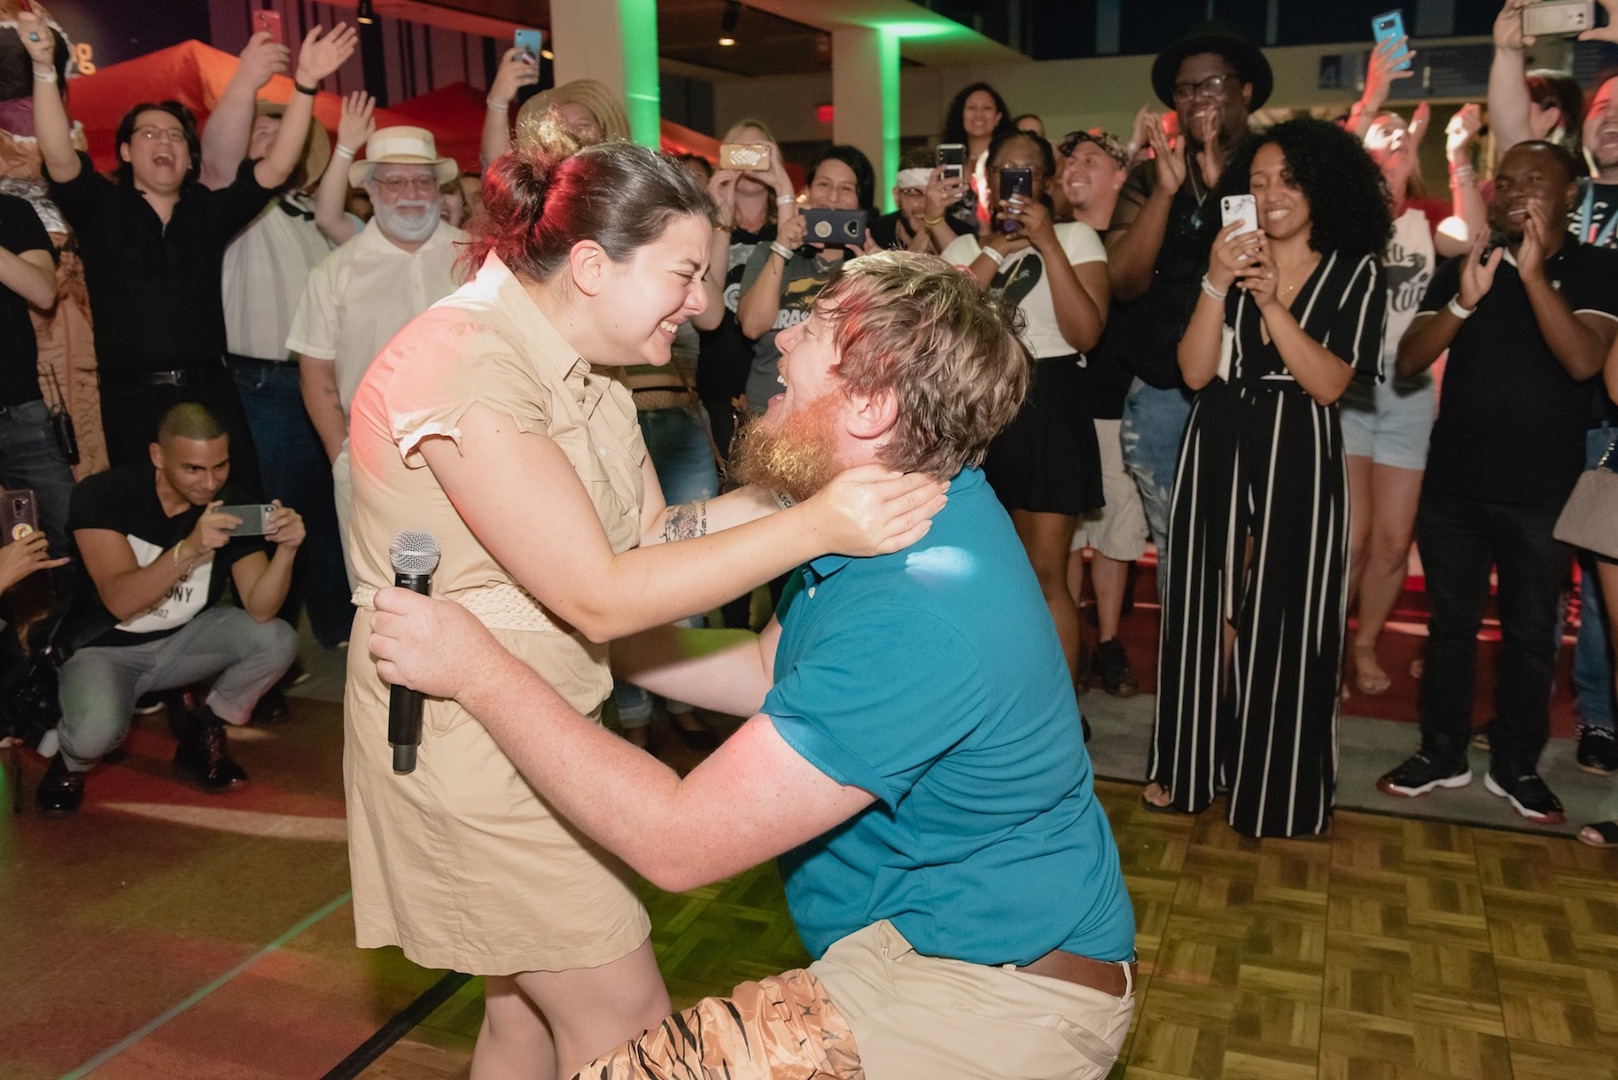 A man proposes to his girlfriend on the dance floor